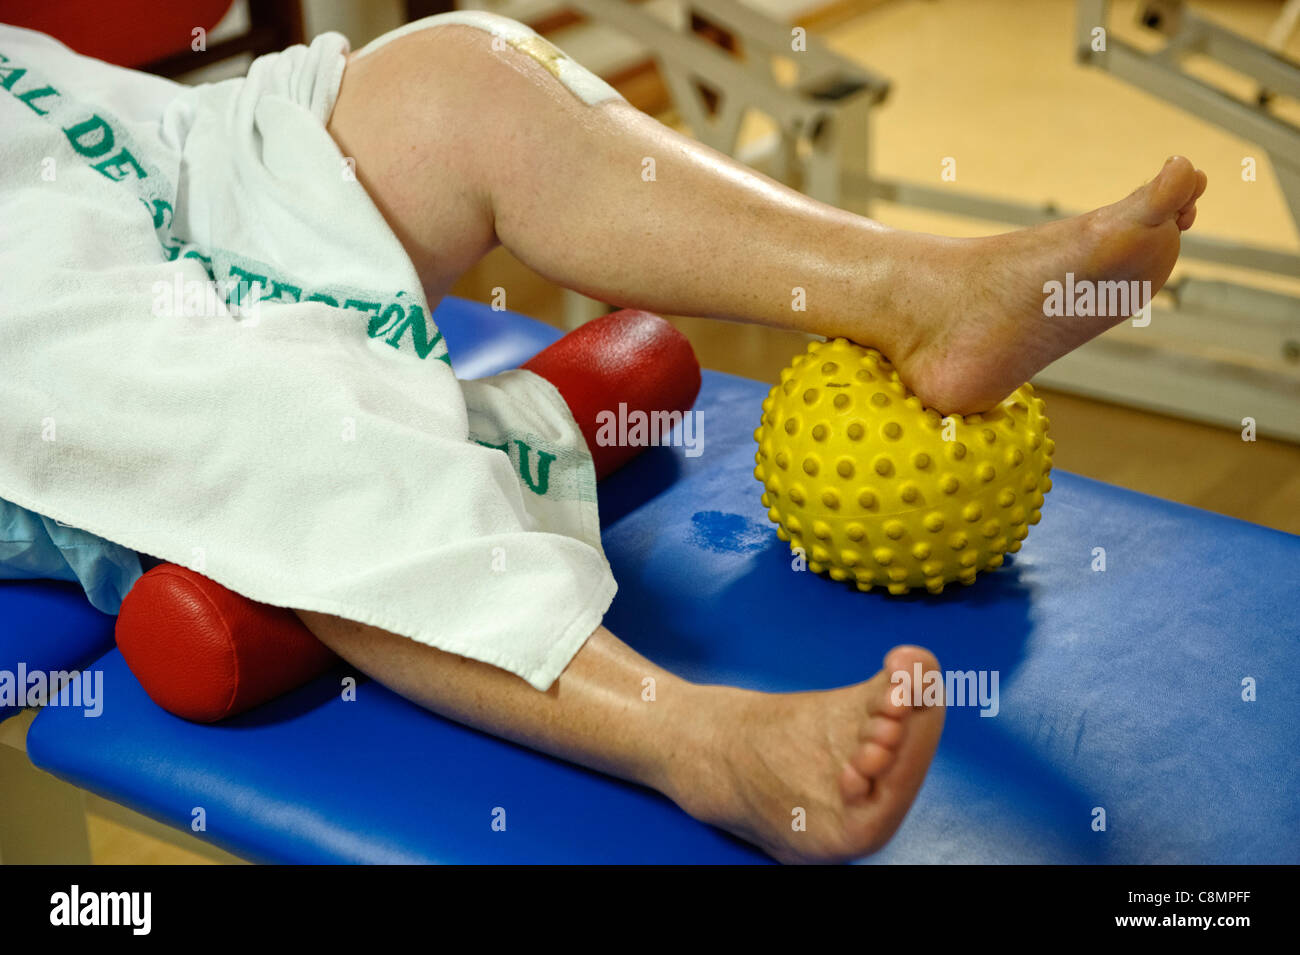 Physiotherapy exercise Stock Photo